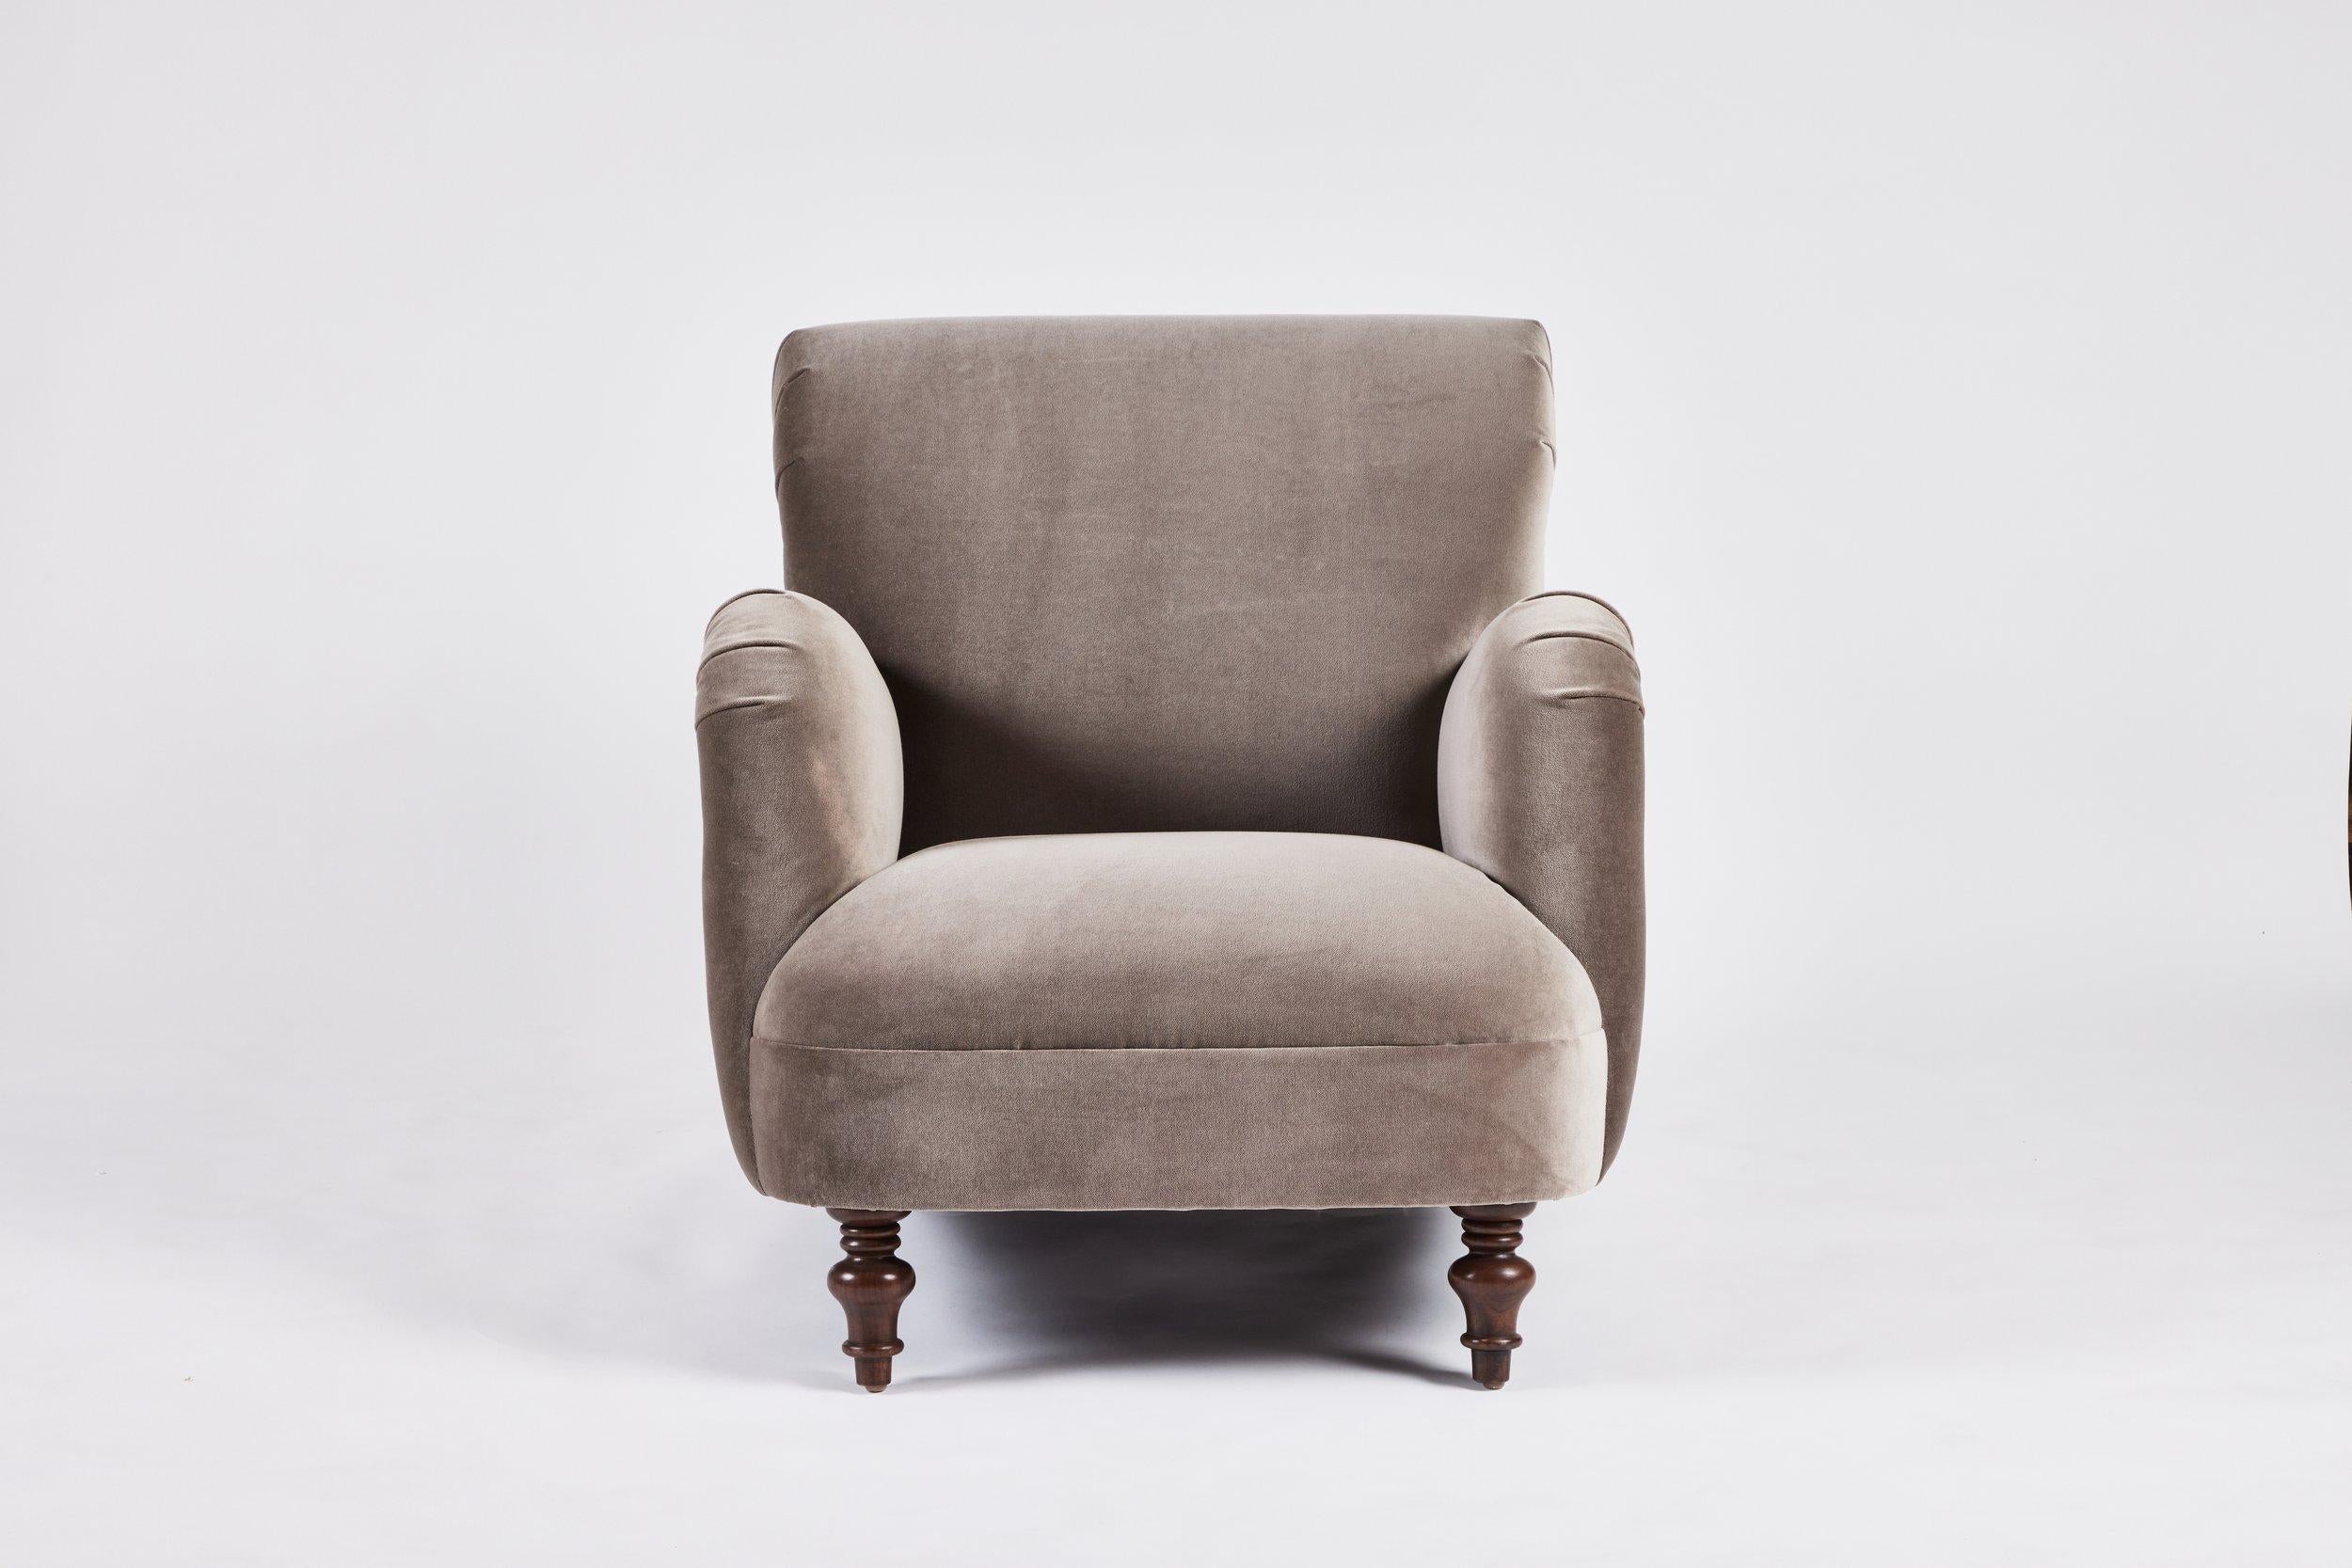 Martin & Brockett’s Lillian chair is our take on a traditional roll arm, featuring a tight seat and two hand-turned front legs. The chair sits slightly lower to the ground with a firm back, for a relaxed yet supported seating feel.

Sold as C.O.M.